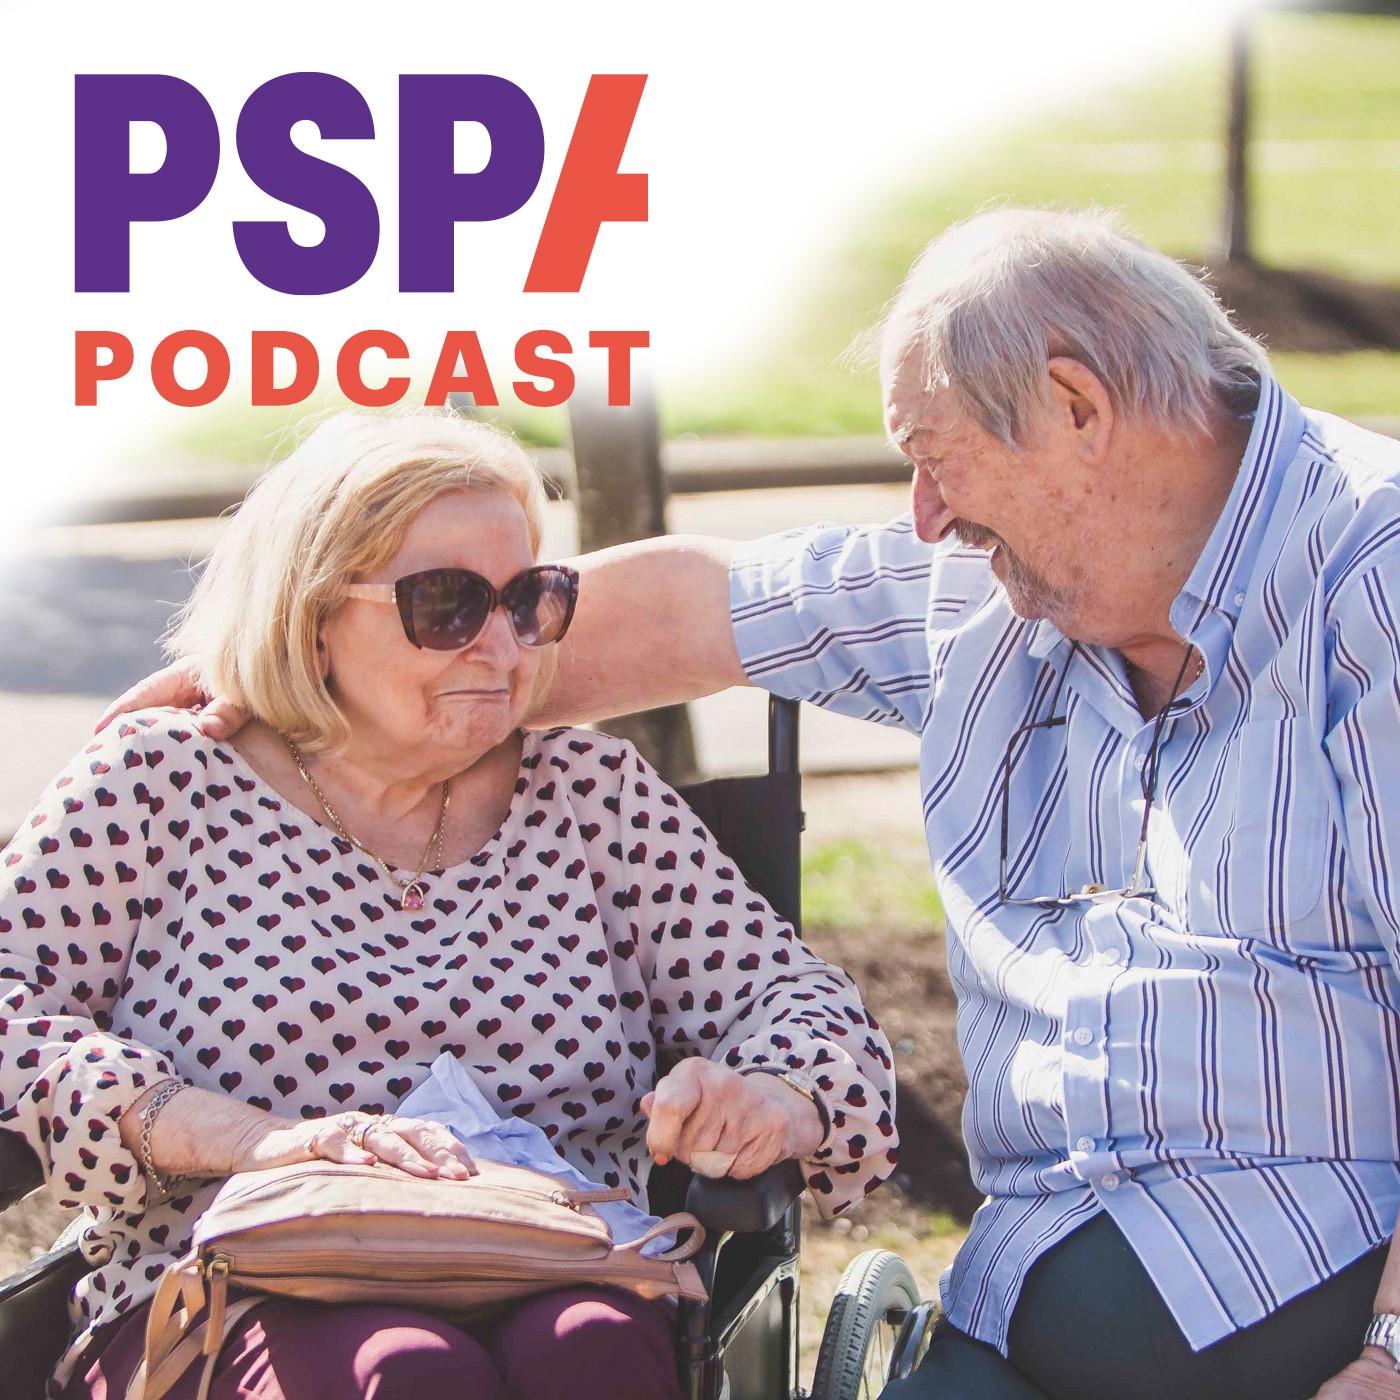 PSPA Podcast launches with support from Pavers